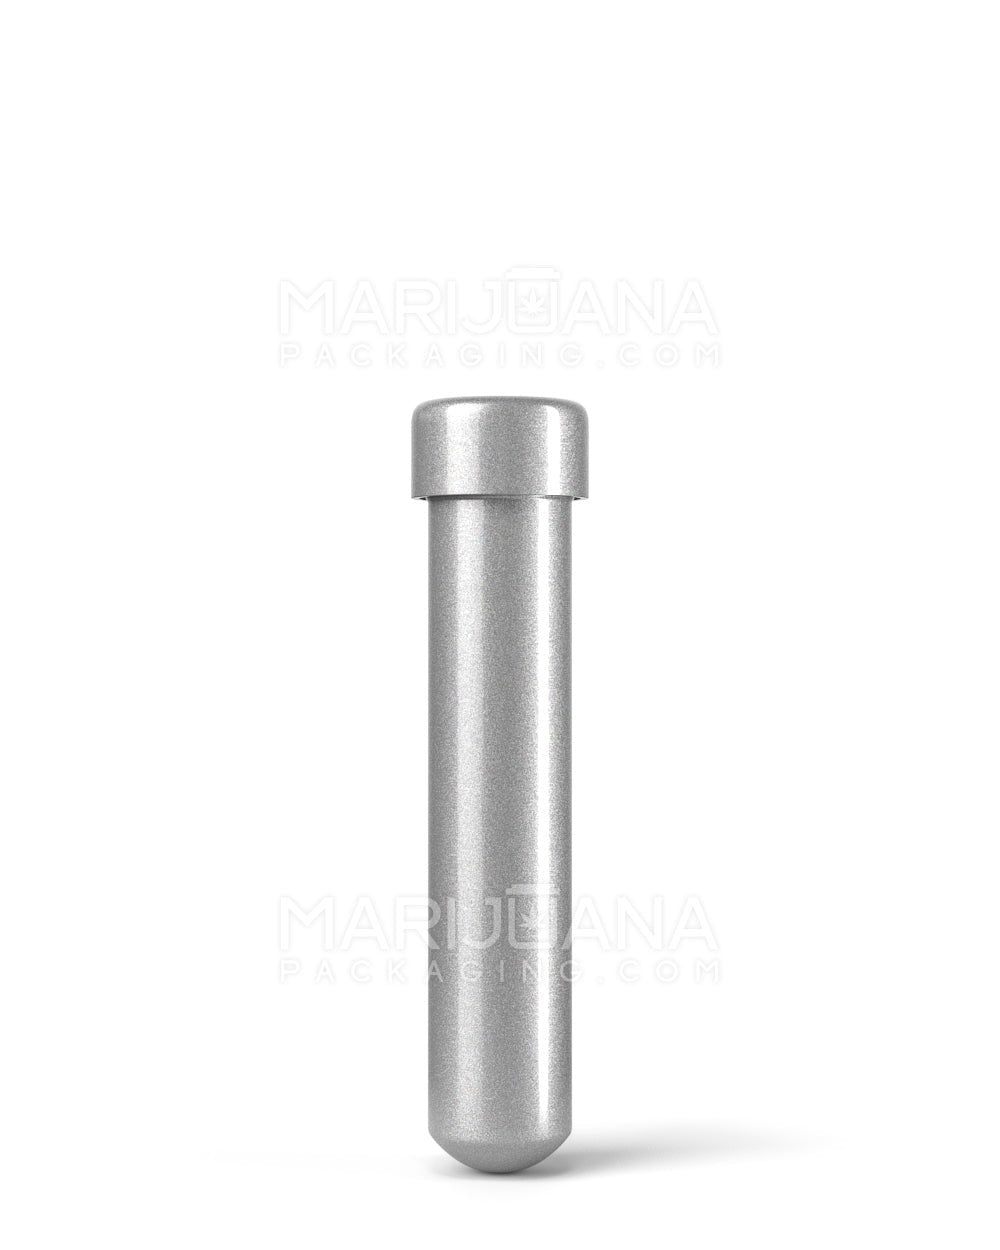 Child Resistant | Pop Top Opaque Metal Pre-Roll Tubes | 95mm - Silver - 250 Count - 1